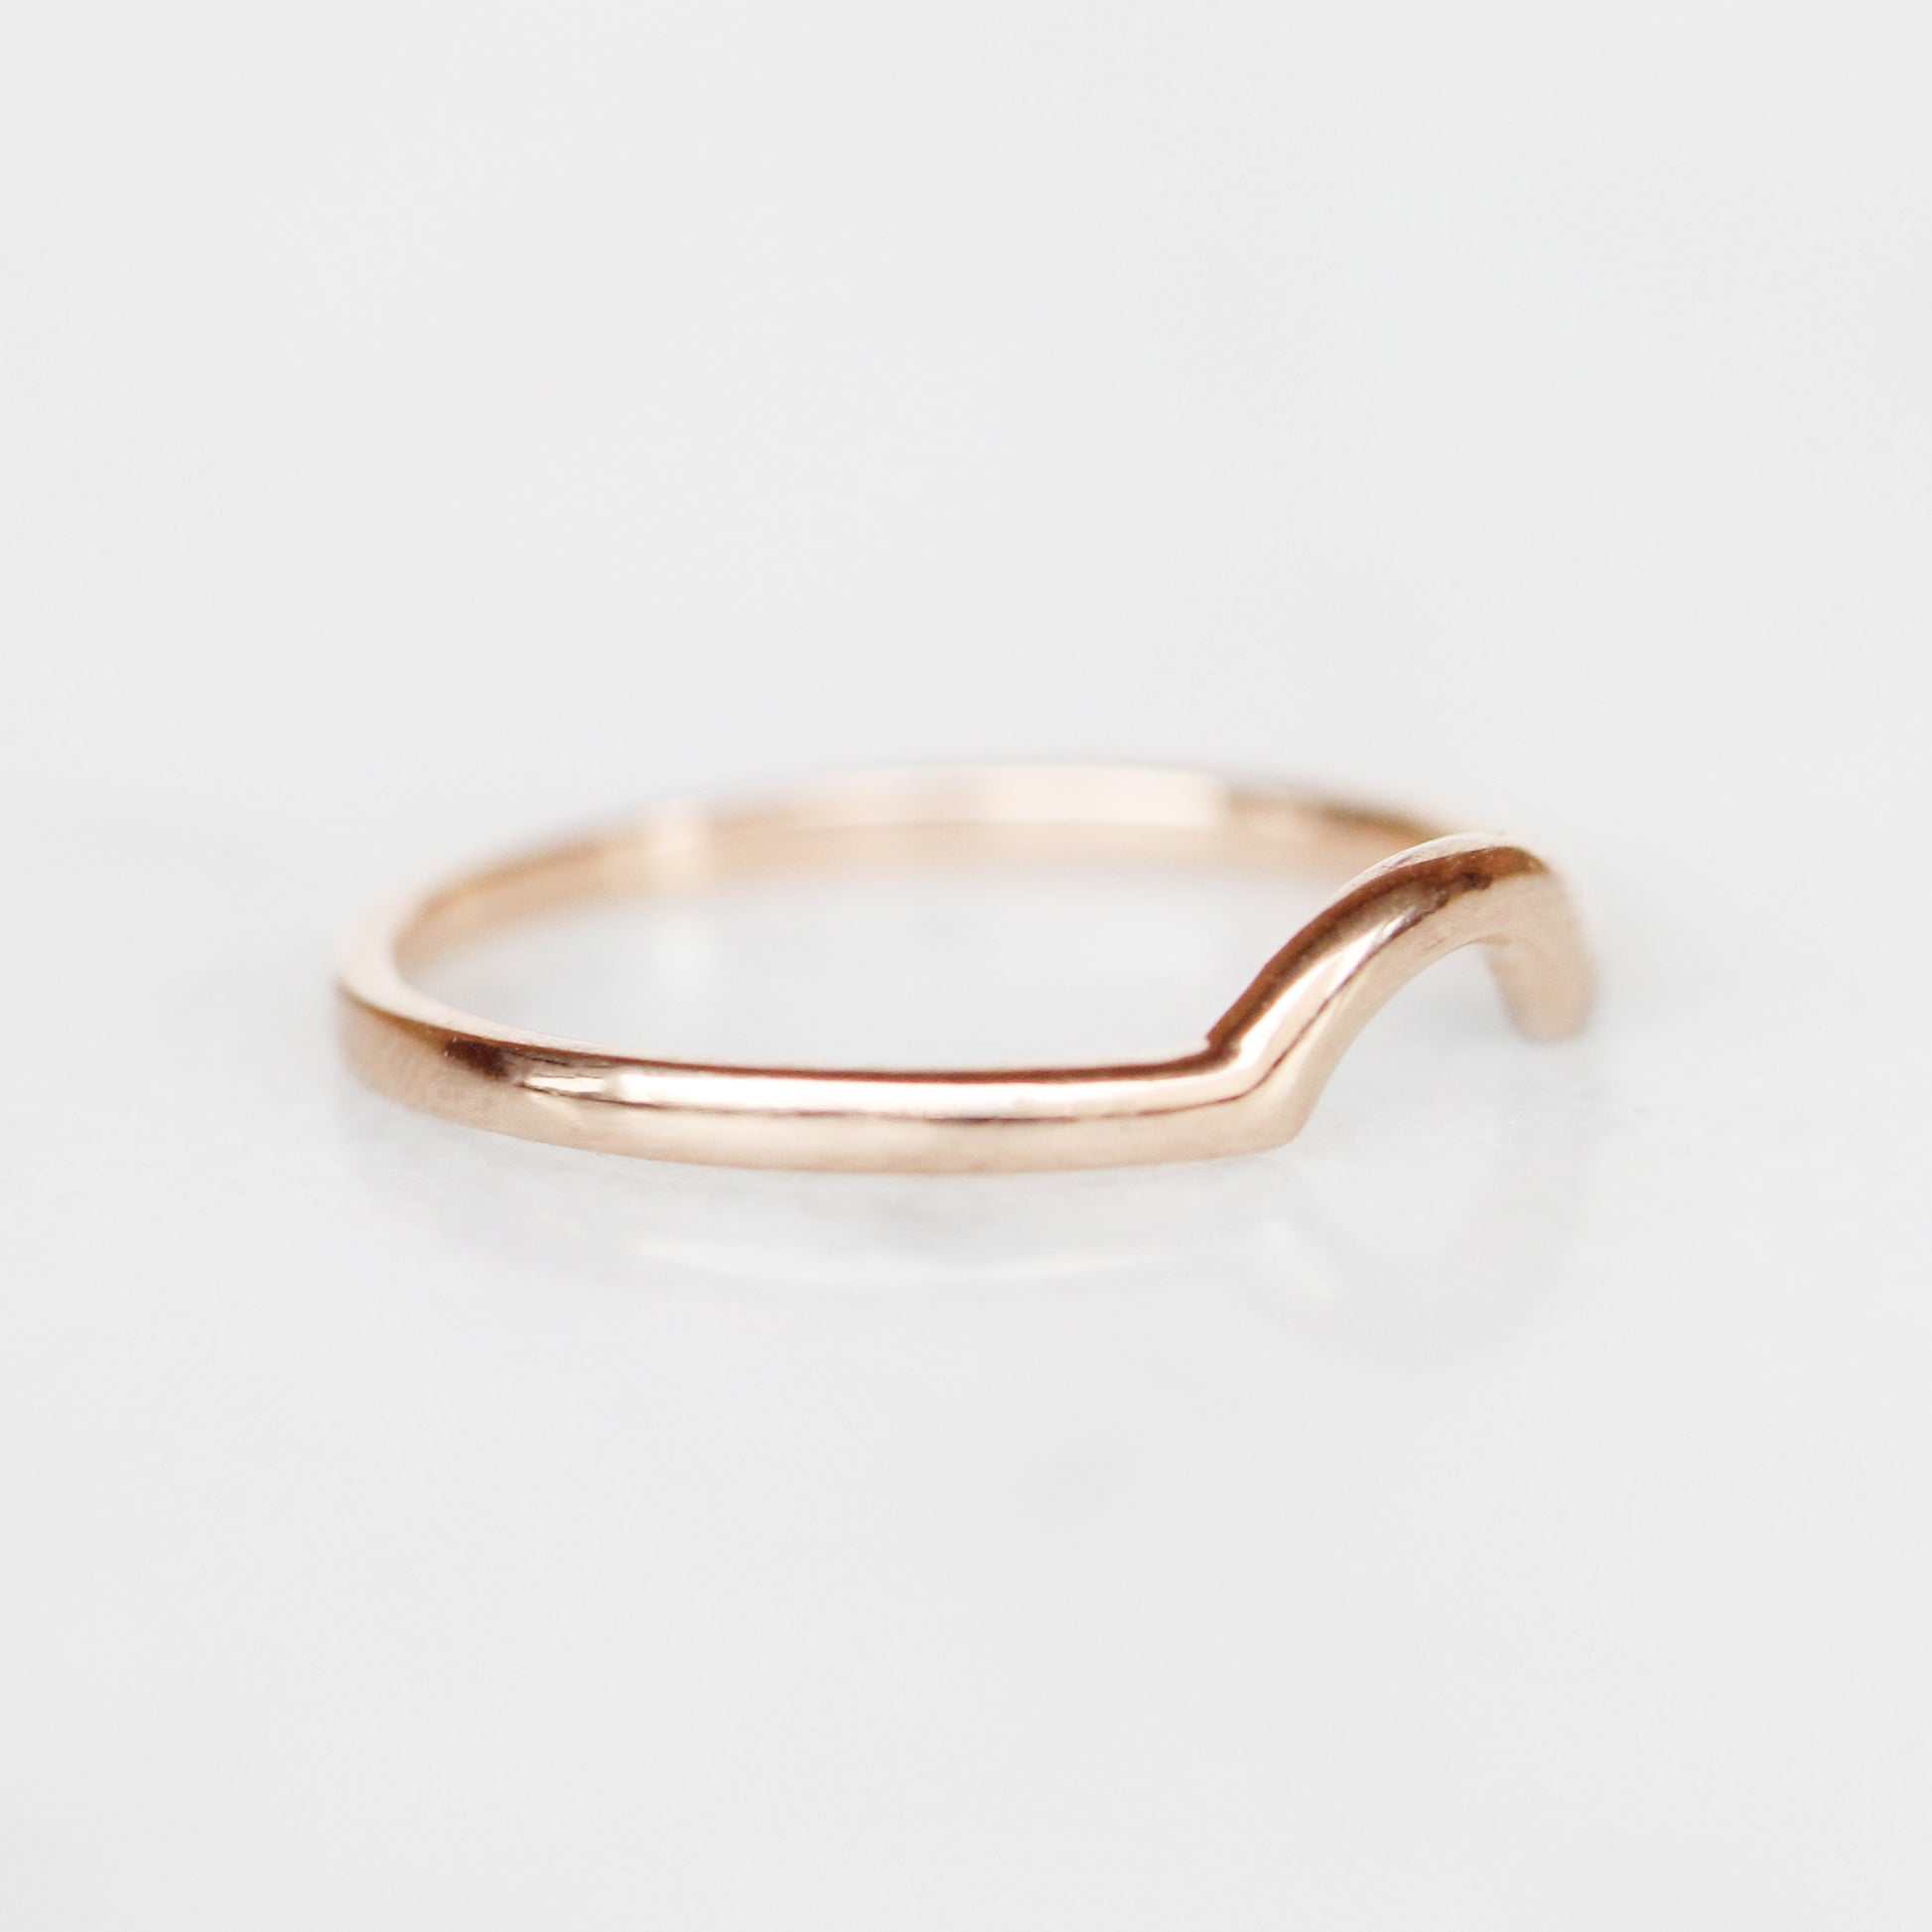 Archer wedding band - customized contour band - 14k gold of choice - Midwinter Co. Alternative Bridal Rings and Modern Fine Jewelry